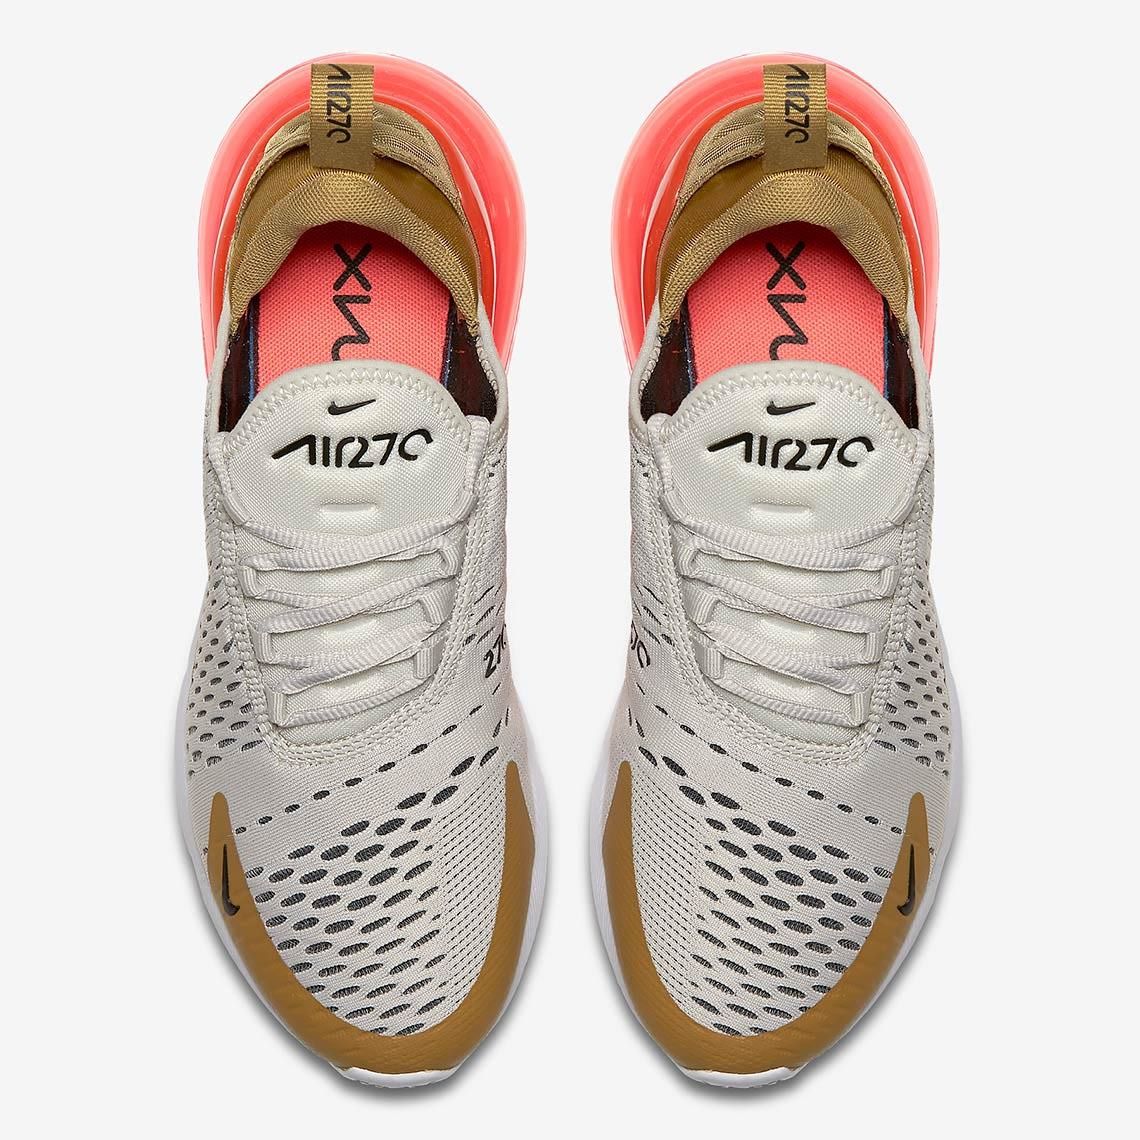 Mountain Laboratory tight Flight Gold' Nike Air Max 270s Ready for Takeoff - Sneaker Freaker